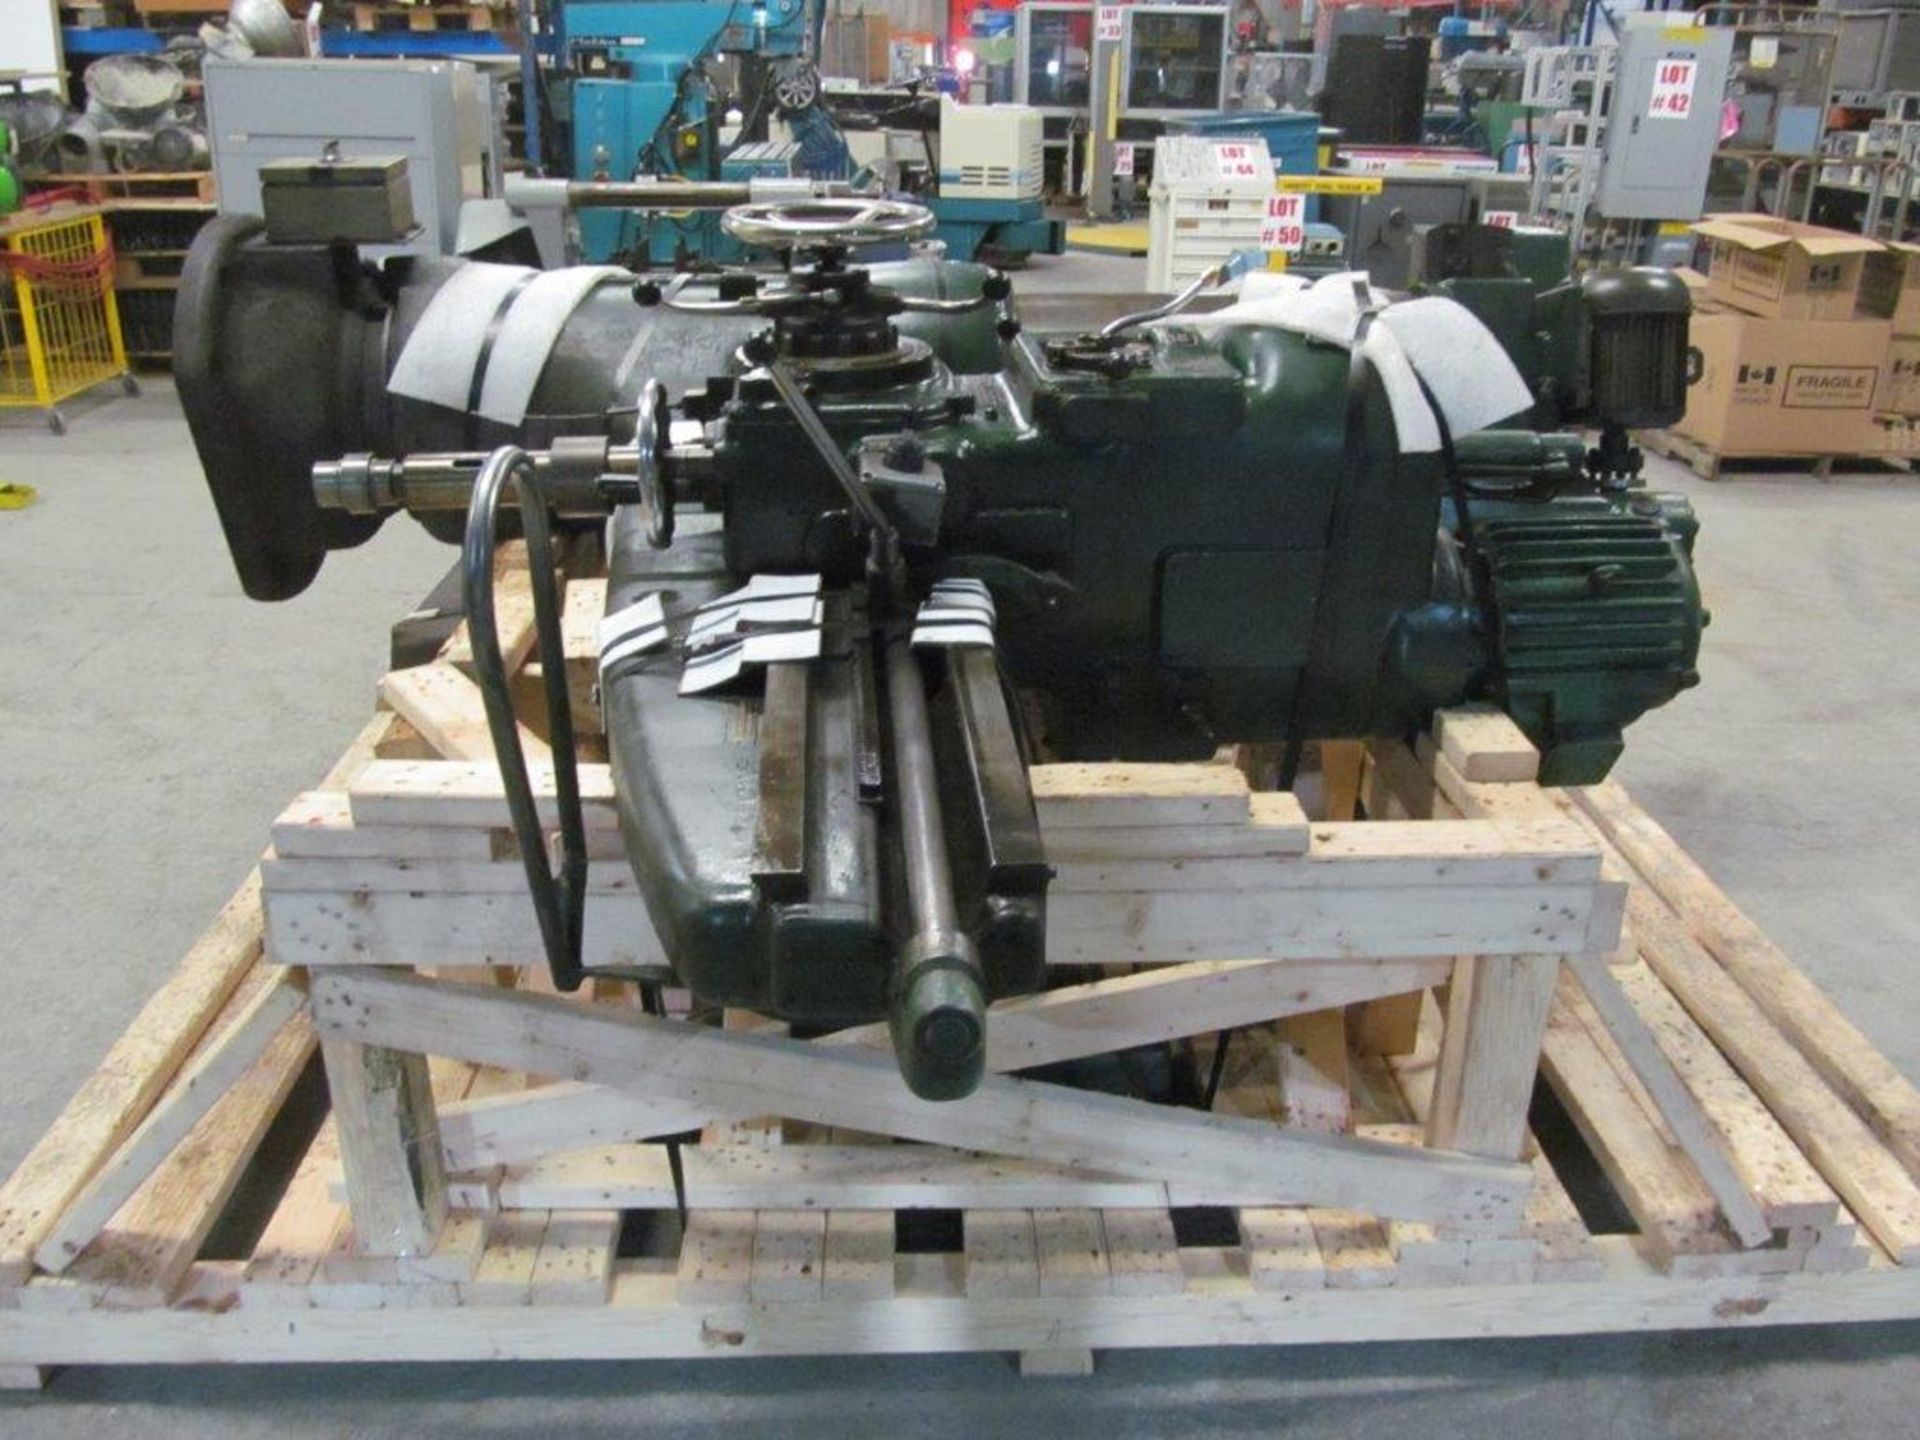 ARCHDALE RADIAL ARM DRILL, 5 FT ARM, MT5 SPINDLE TAPER, 12 SPINDLE SPEED, 40-1000 RPM, C/W BOX TABLE - Image 4 of 10